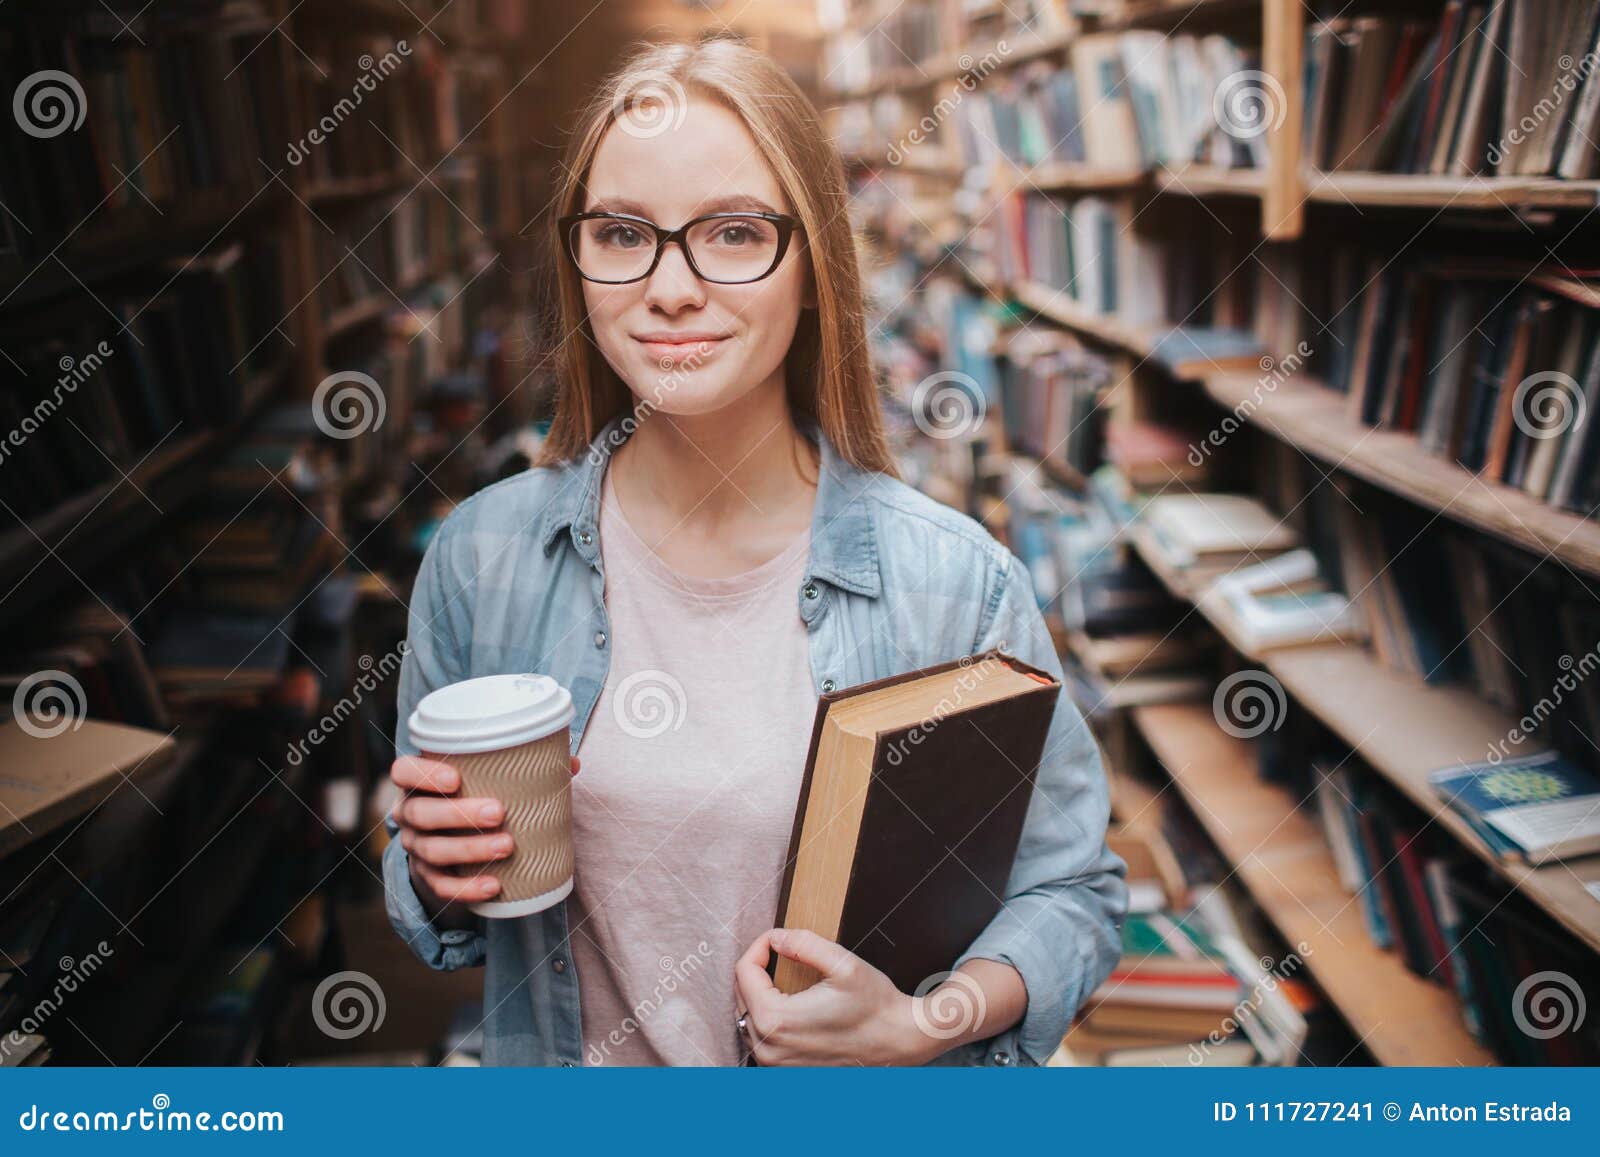 Smart And Clever Student Is Standing In The Public Library. She Is Holding A Cup Of ...1300 x 957